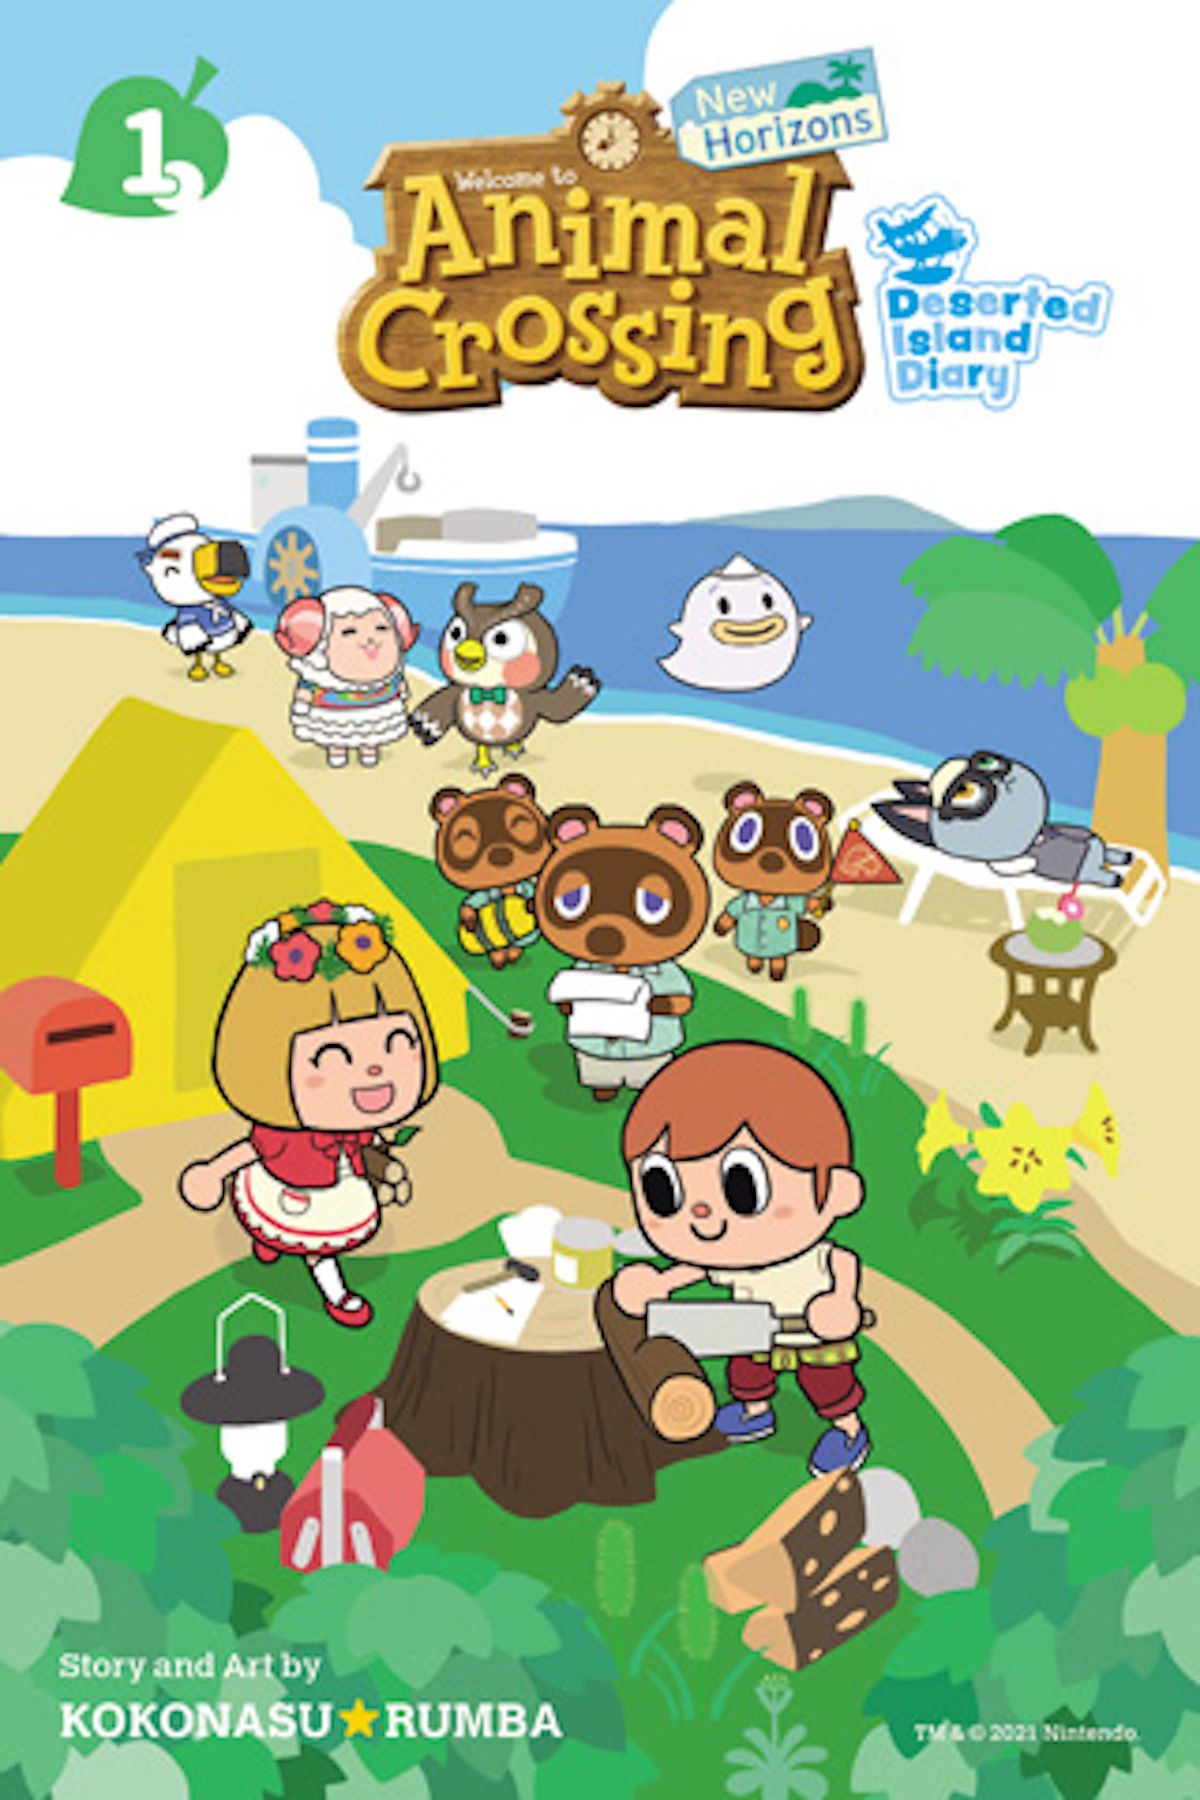 animal-crossing-new-horizons-deserted-island-diary-cover